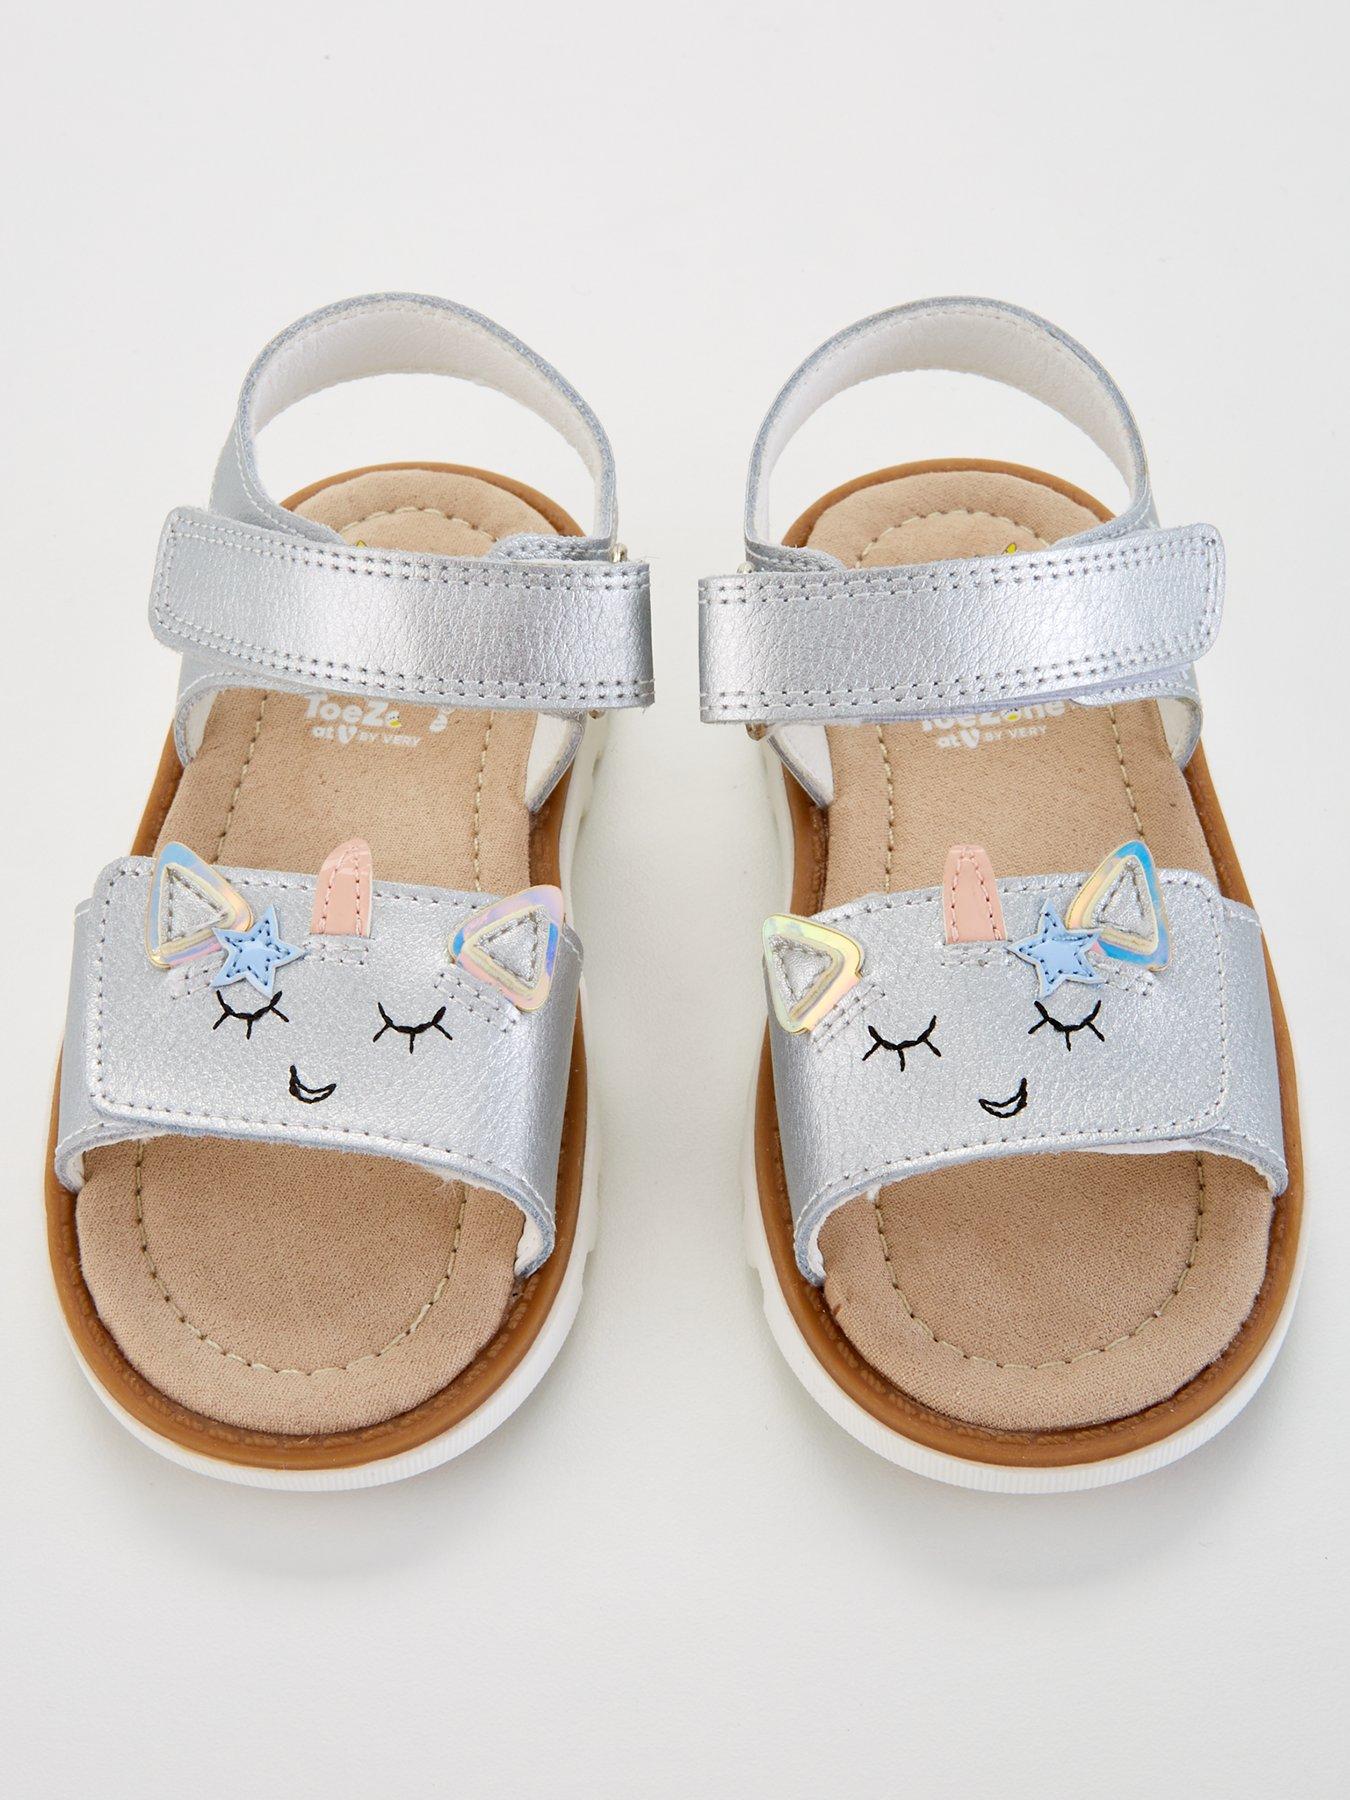 New Girls Toddler Old Navy Silver Faux Leather Cross Strap Sandals Size 6 9 